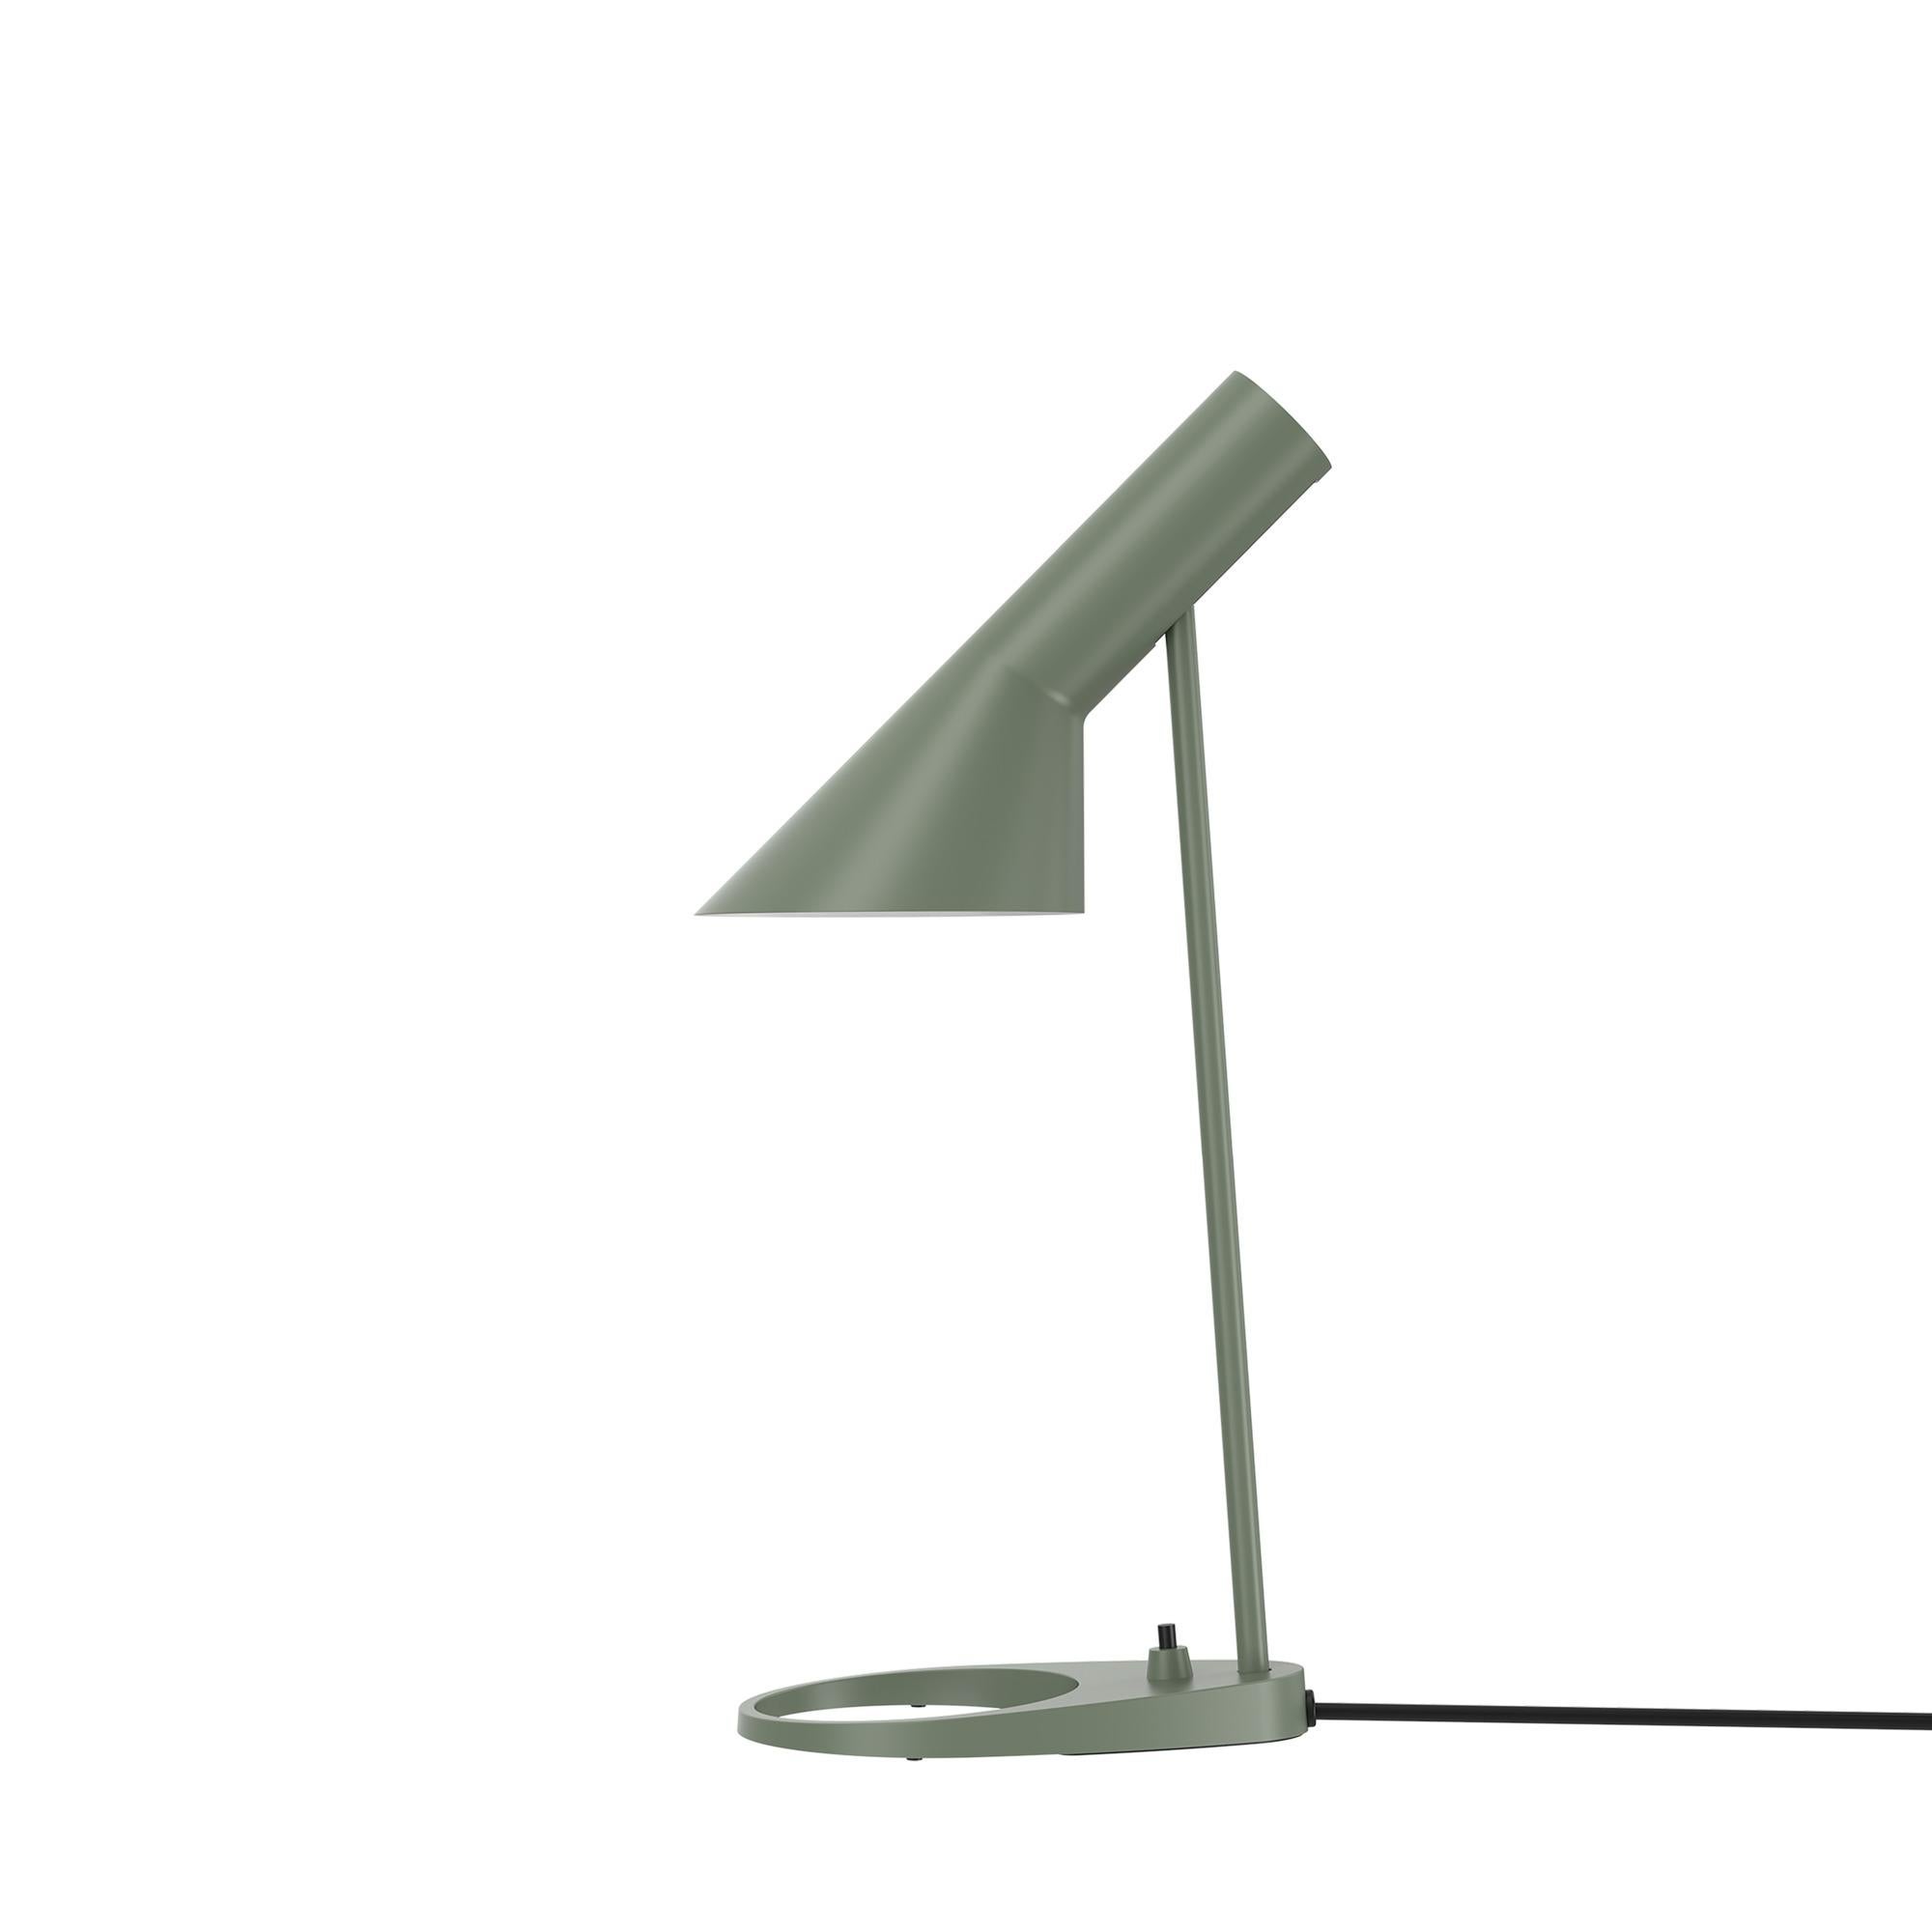 Arne Jacobsen 'AJ Mini' Table Lamp for Louis Poulsen.

The AJ series was part of the lighting collection renowned Danish designer Arne Jacobsen created for the original SAS Royal Hotel in 1957. Today, his furniture and lighting designs are sought